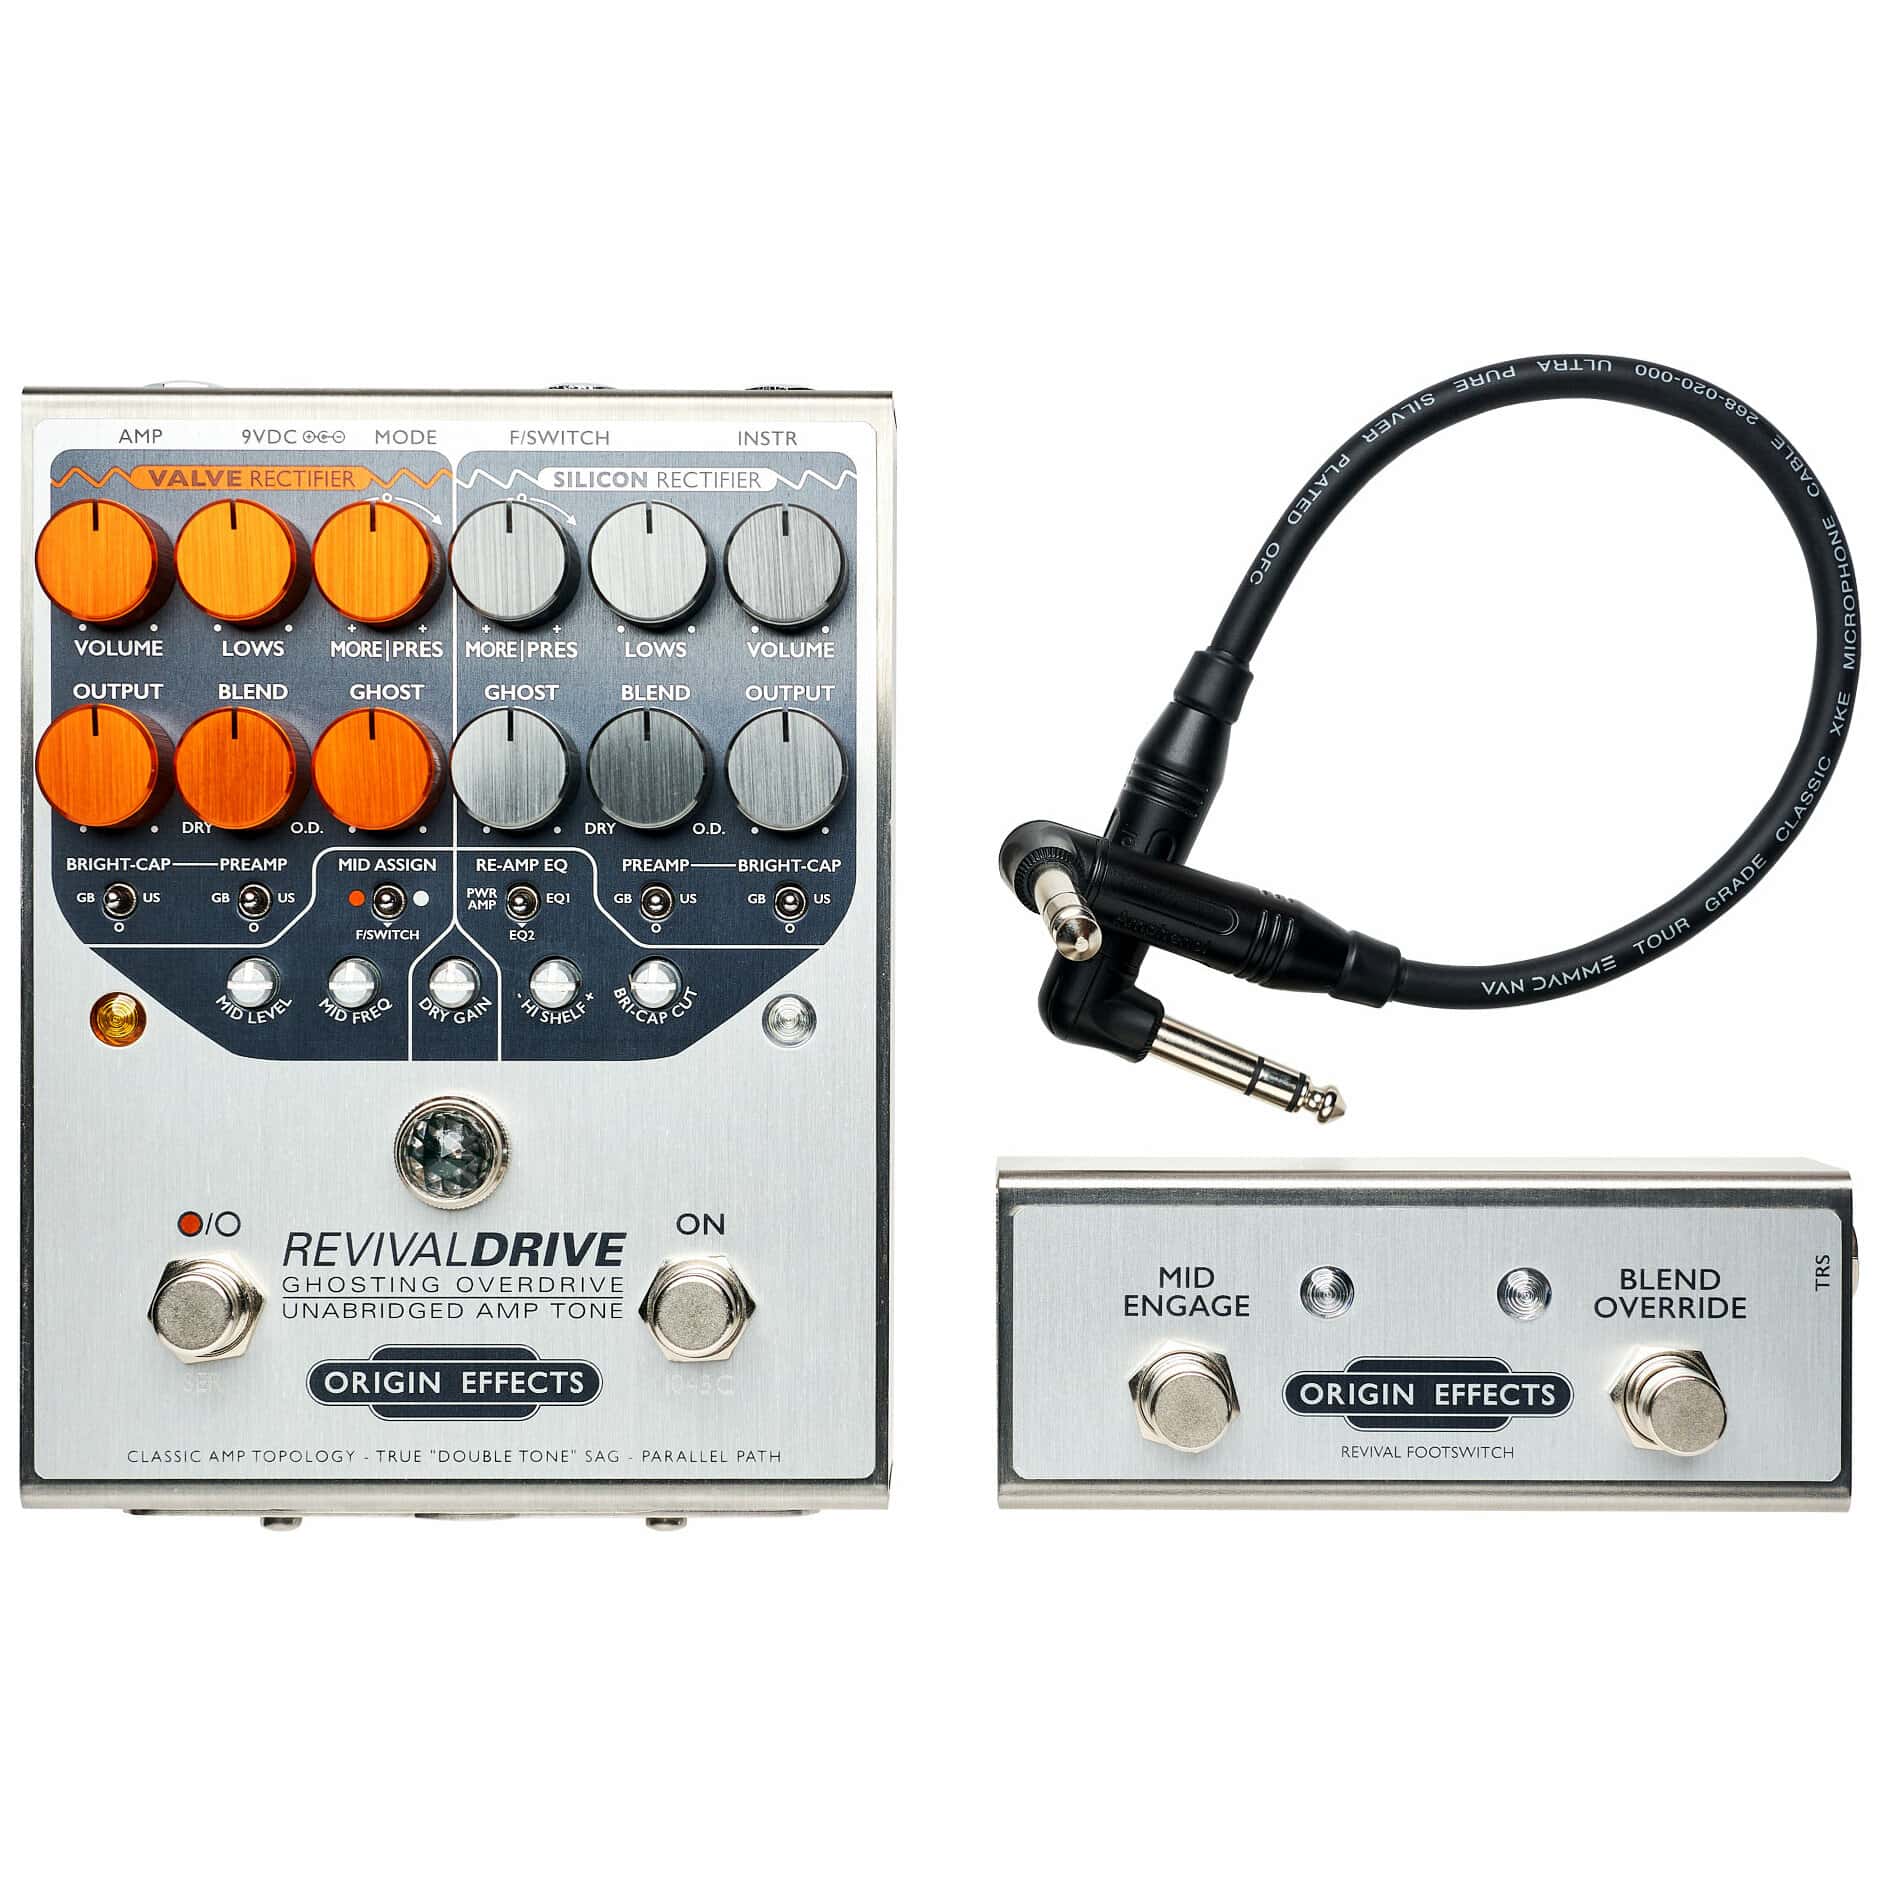 Origin Effects RevivalDRIVE Custom and Footswitch Bundle 4